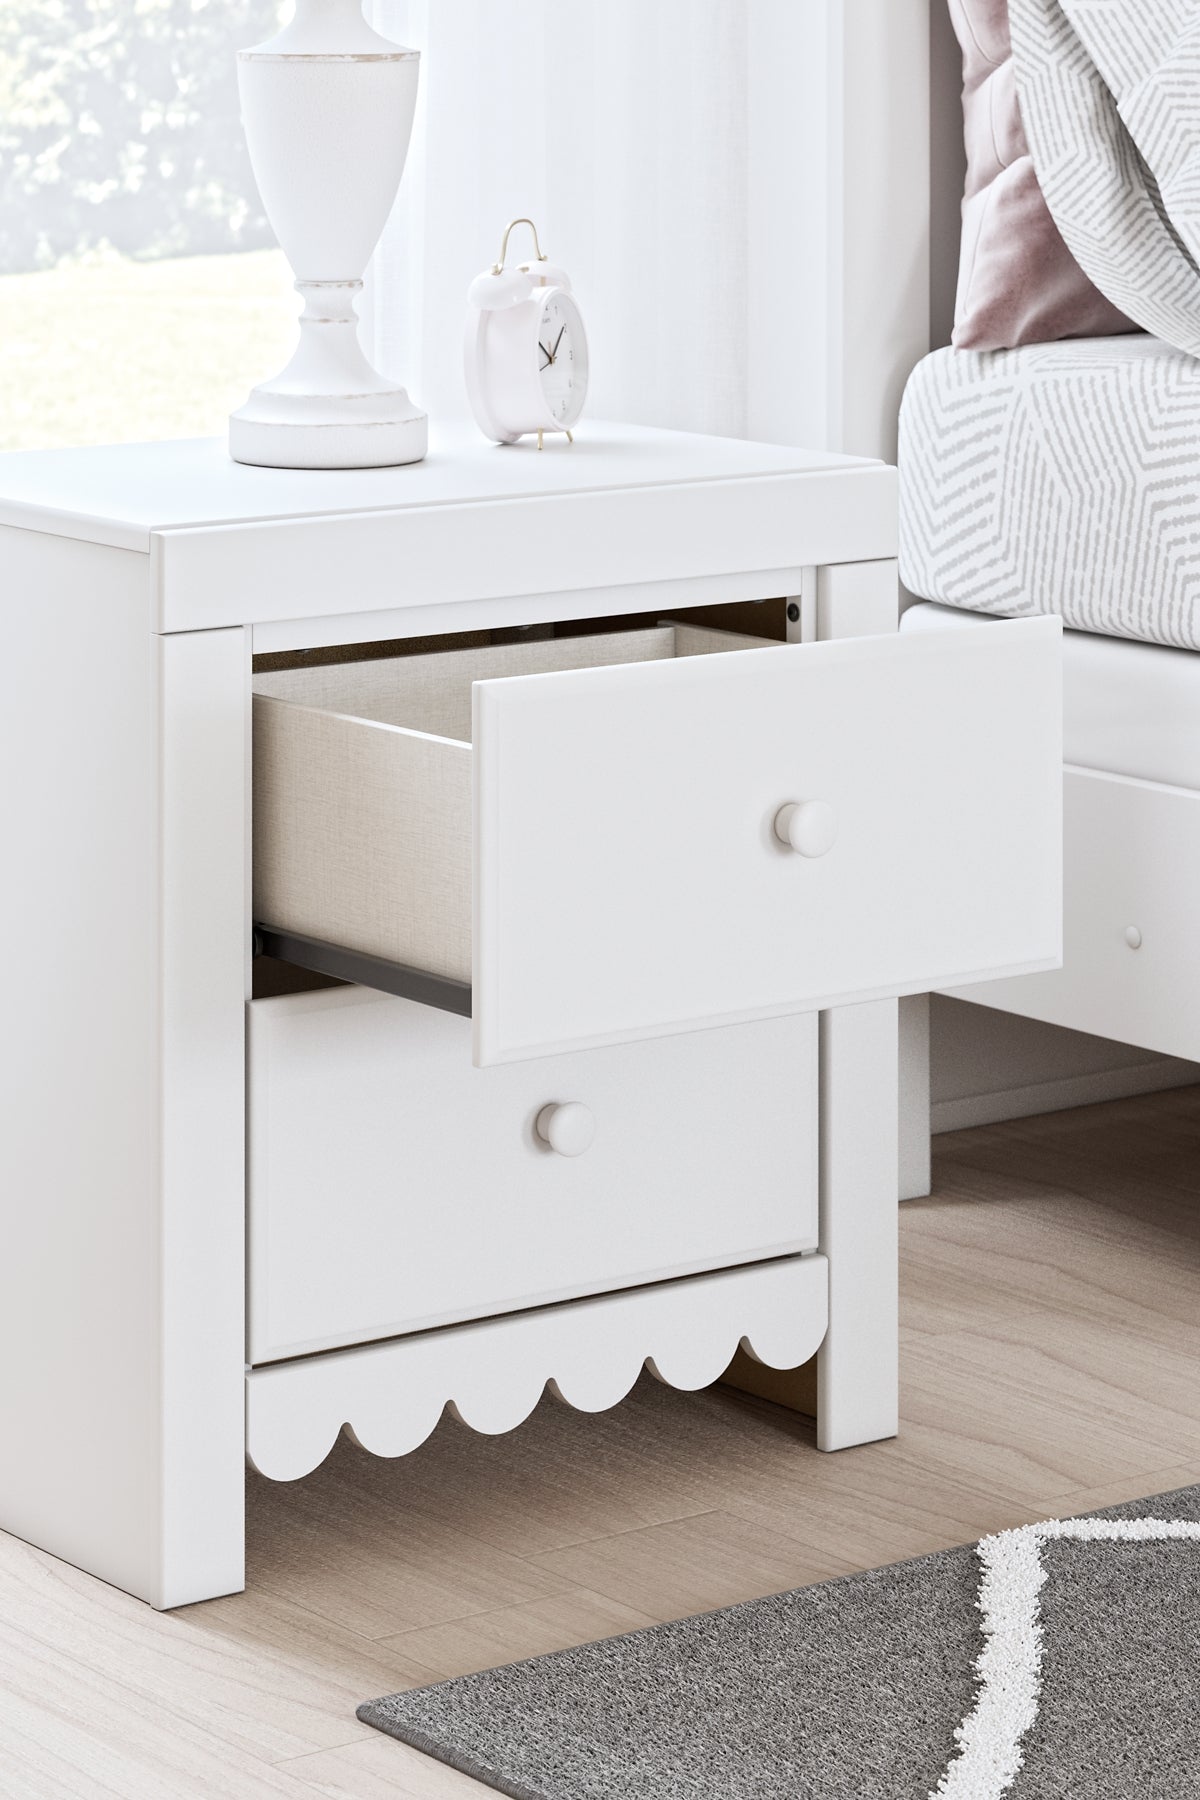 Mollviney Twin Panel Storage Bed with 2 Nightstands